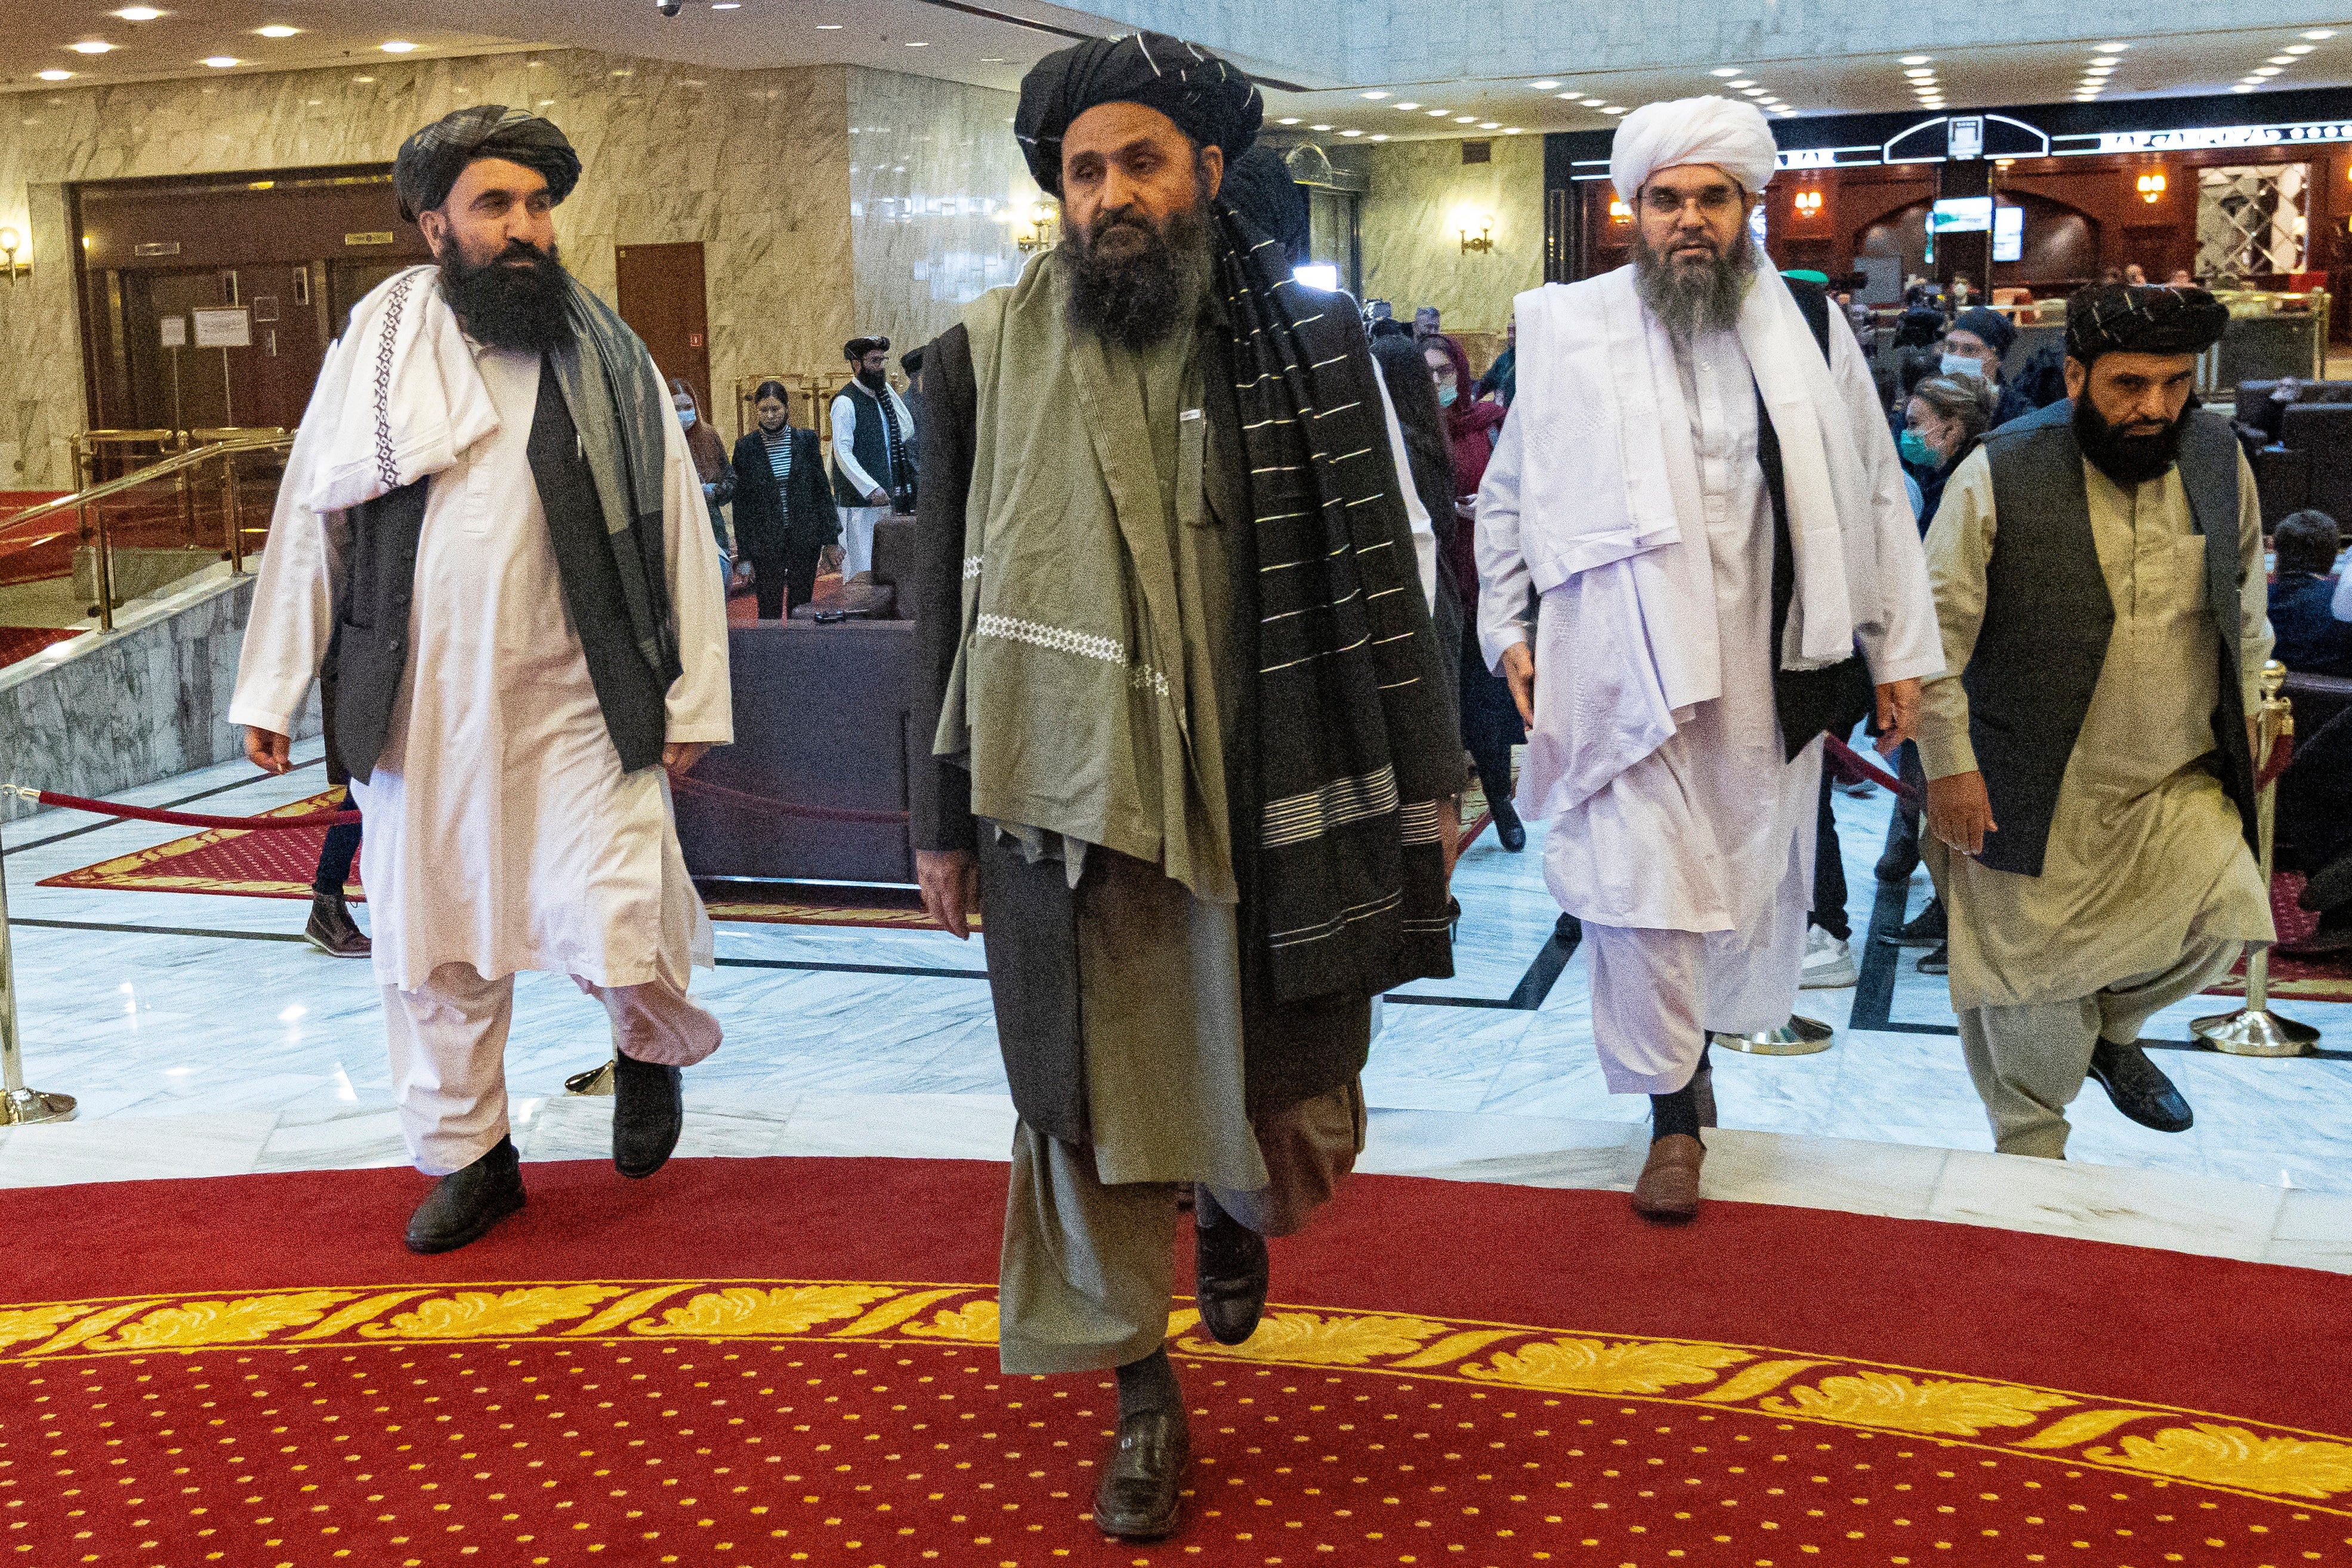 Taliban co-founder Mullah Abdul Ghani Baradar, center, at an international peace conference in Russia in March